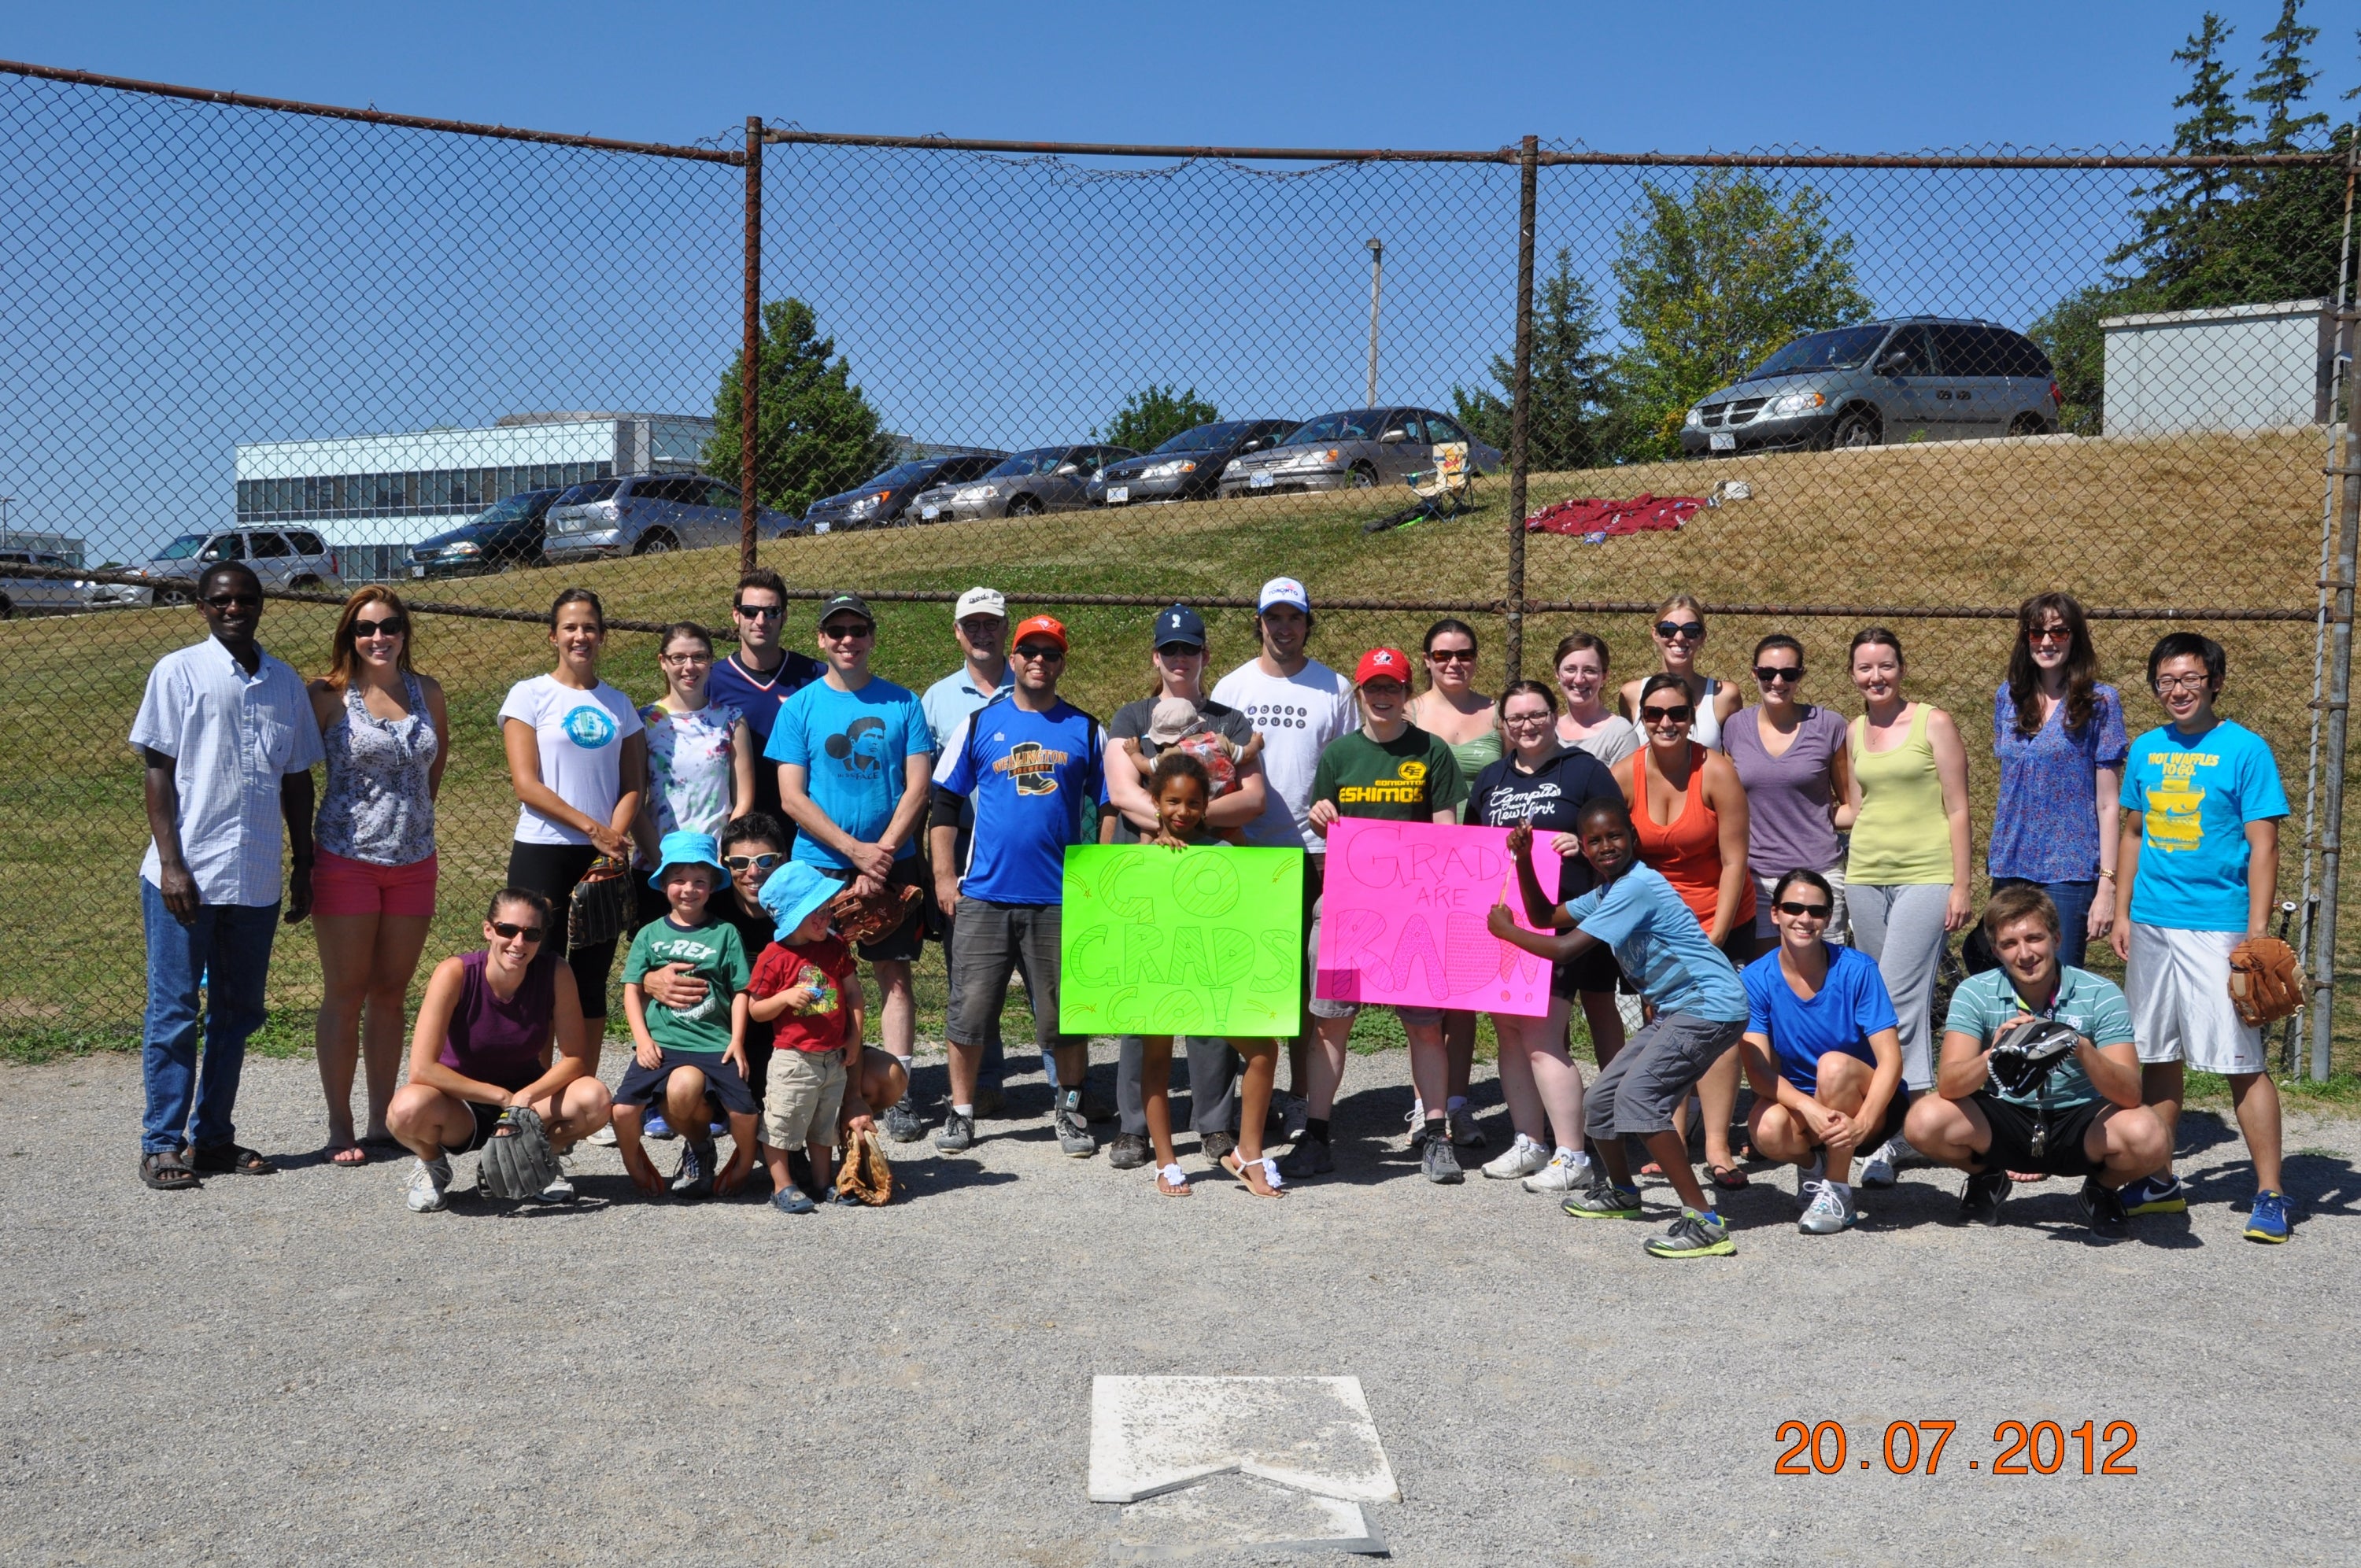 Group picture from 2012 Softball Game